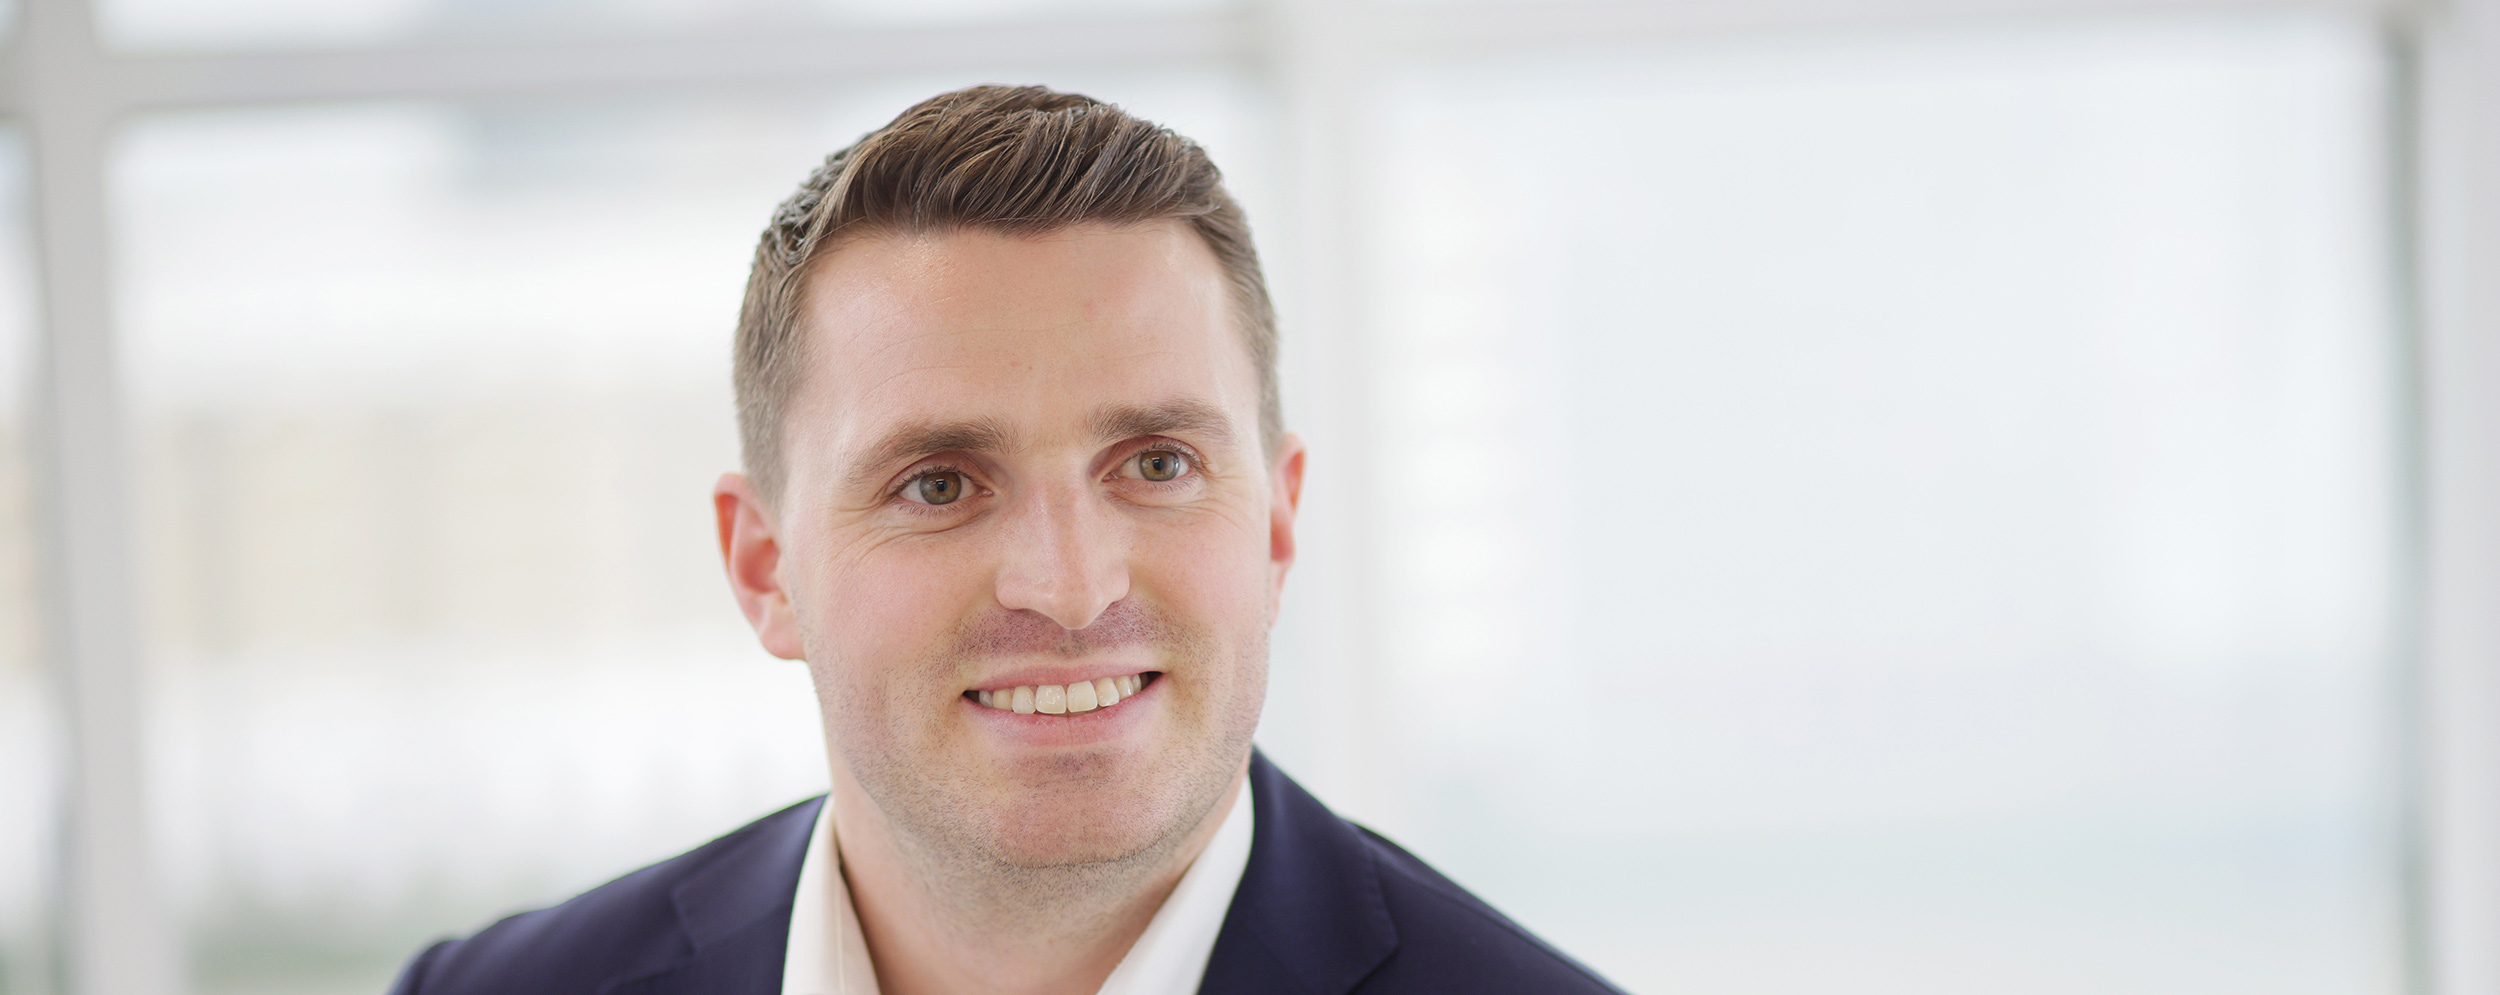 Experienced transactional risk professional Sam Jeater joins Devonshire